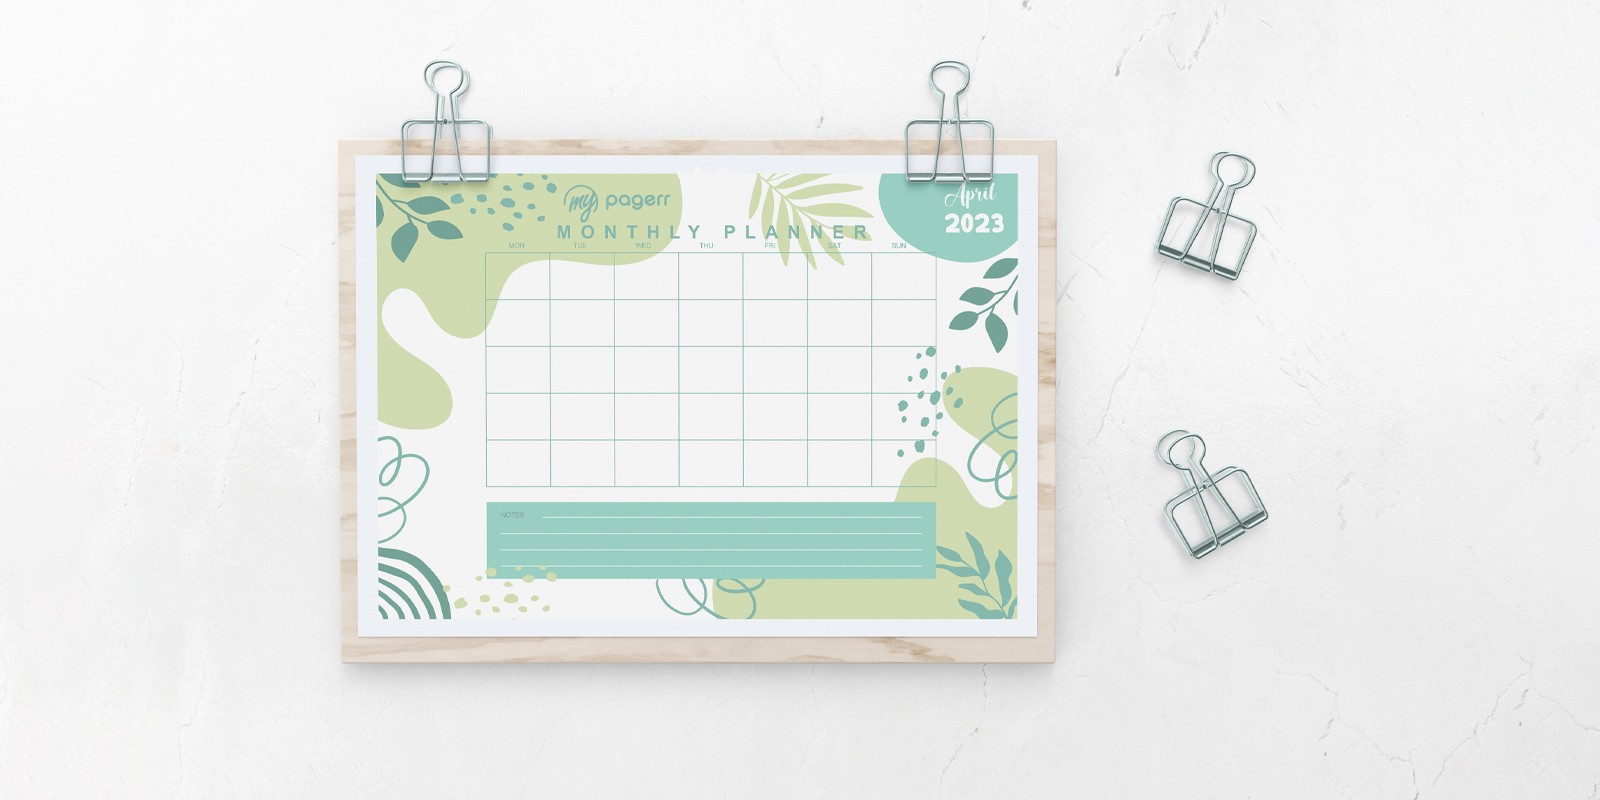 Calendar planners in Valencia - Print with Pagerr